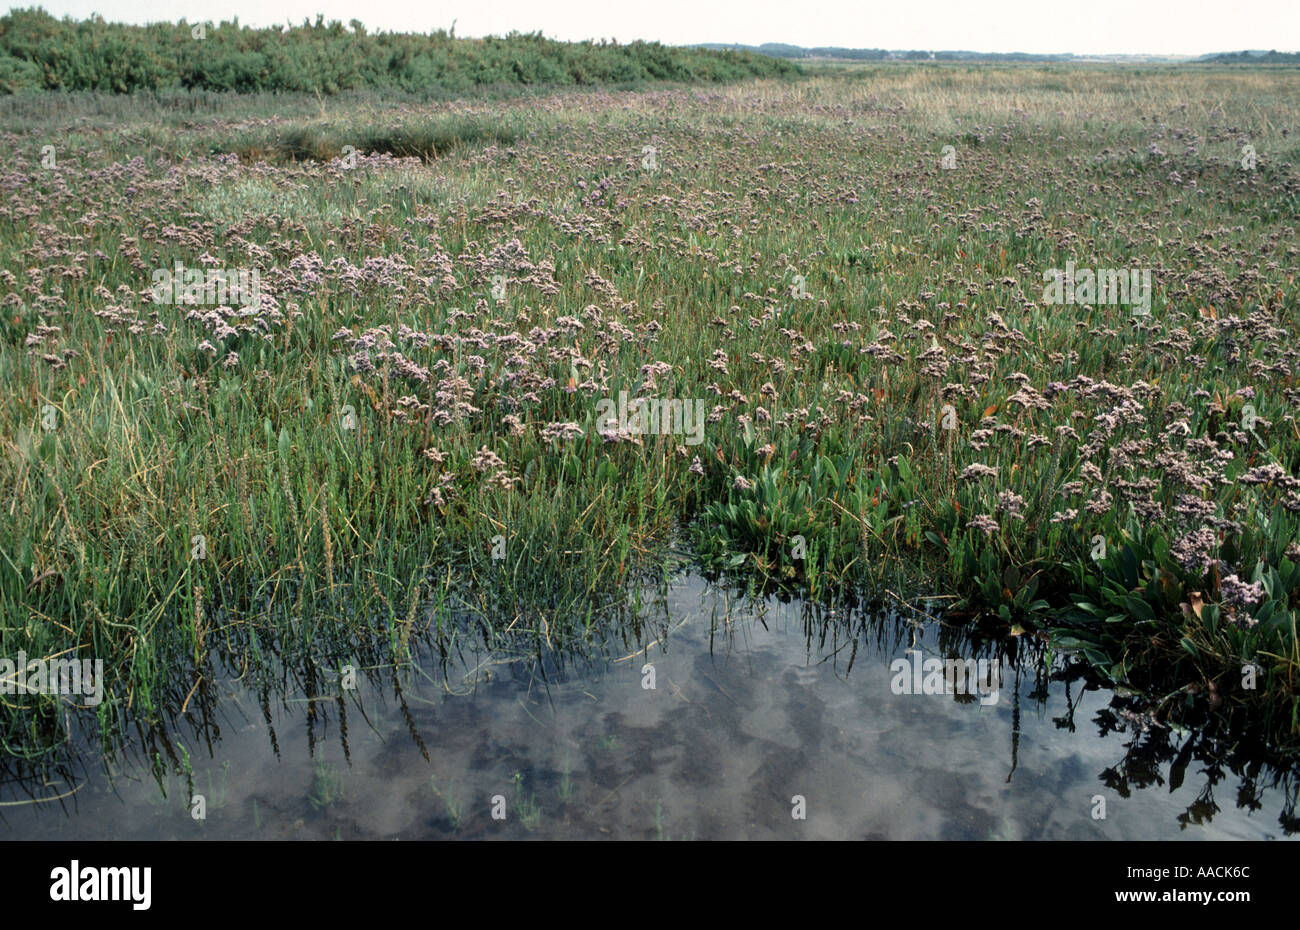 A saltmarsh behind a Norfolk beach with vegetation particularly sea lavender Limonium vulgare in flower Stock Photo